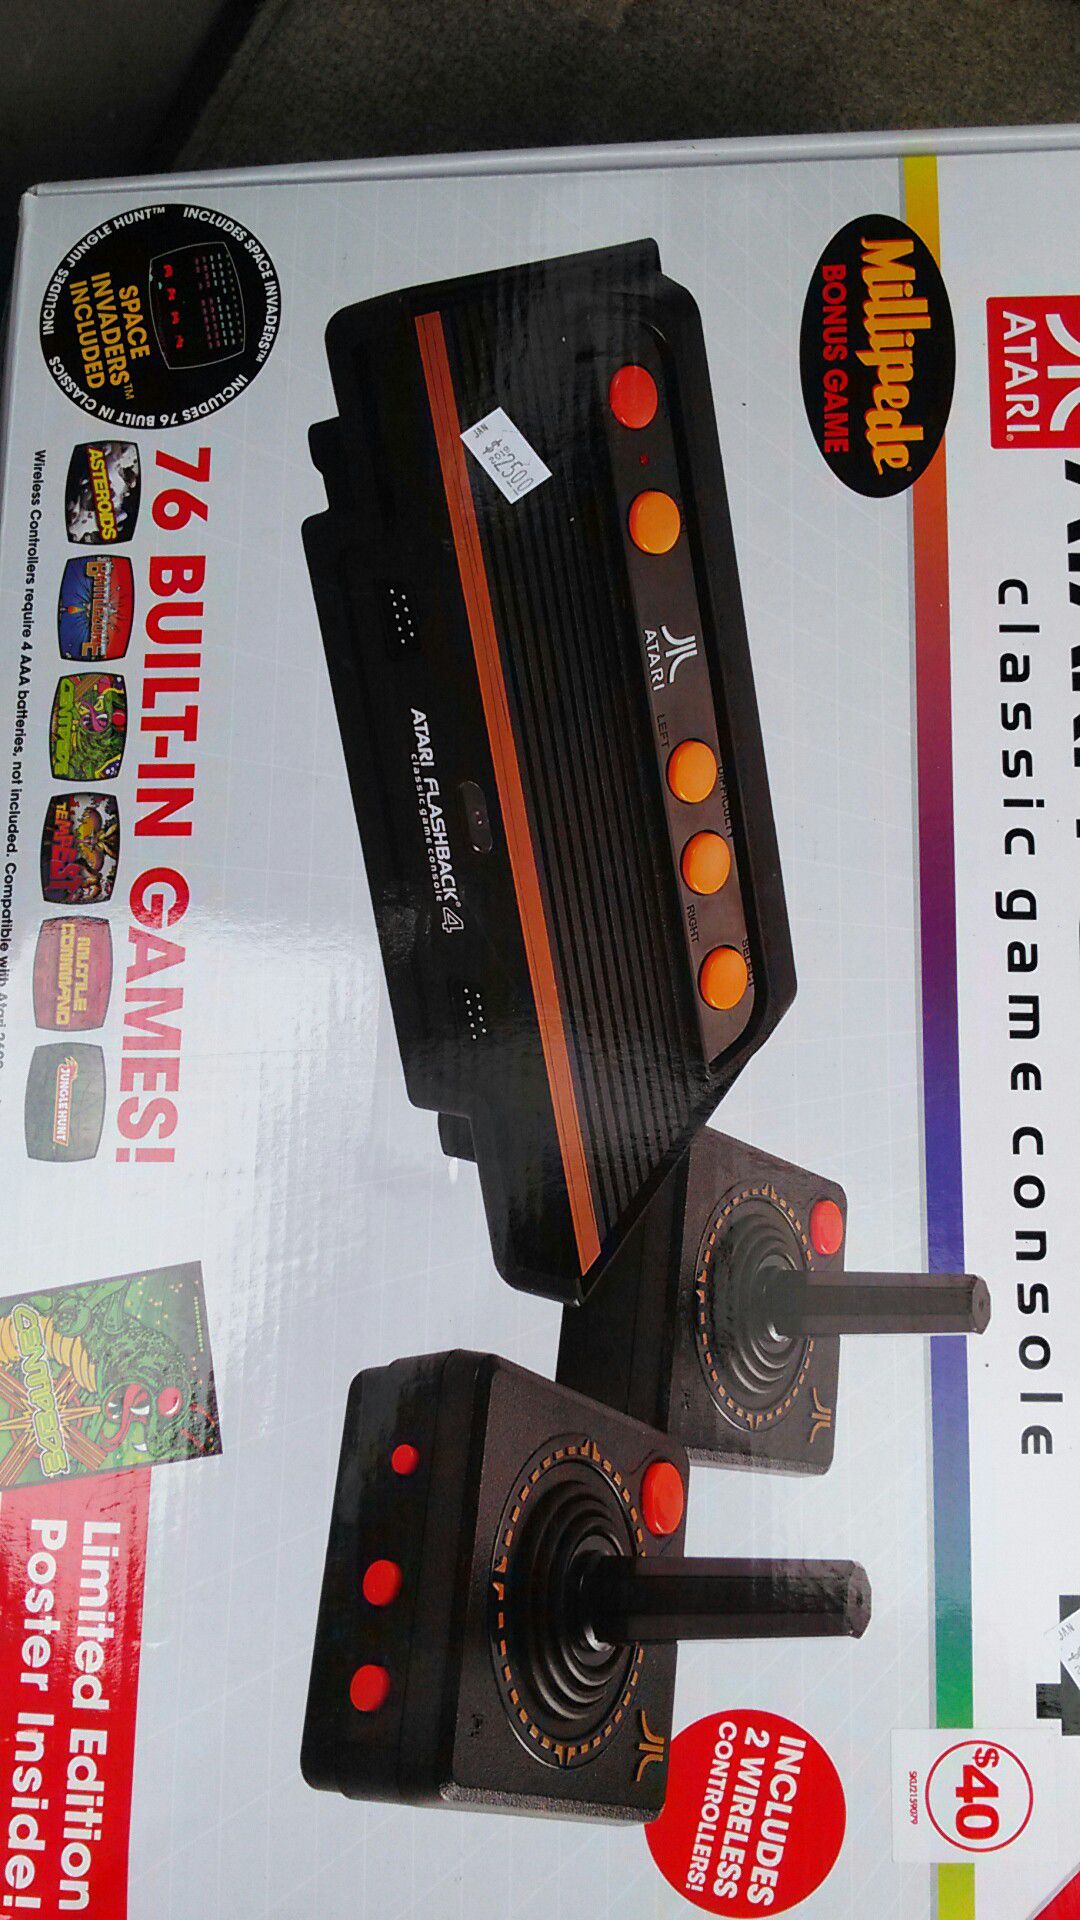 Atari Flashback classic game console 76 built in games